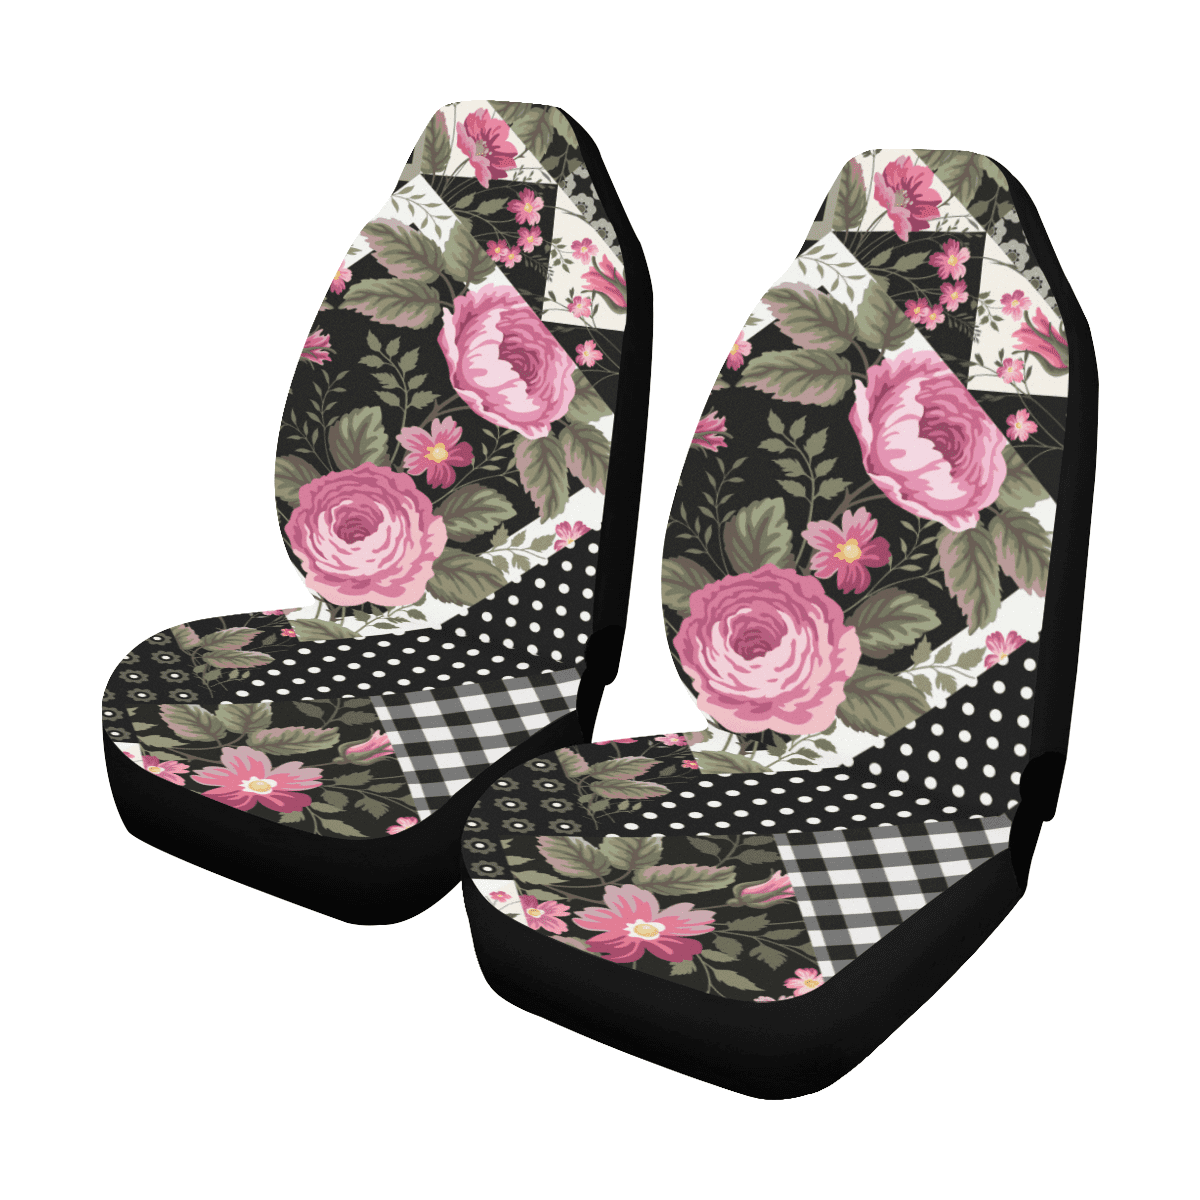 Truck SUV 2 Pieces INTERESTPRINT Universal Car Seat Covers Fit Most Car 